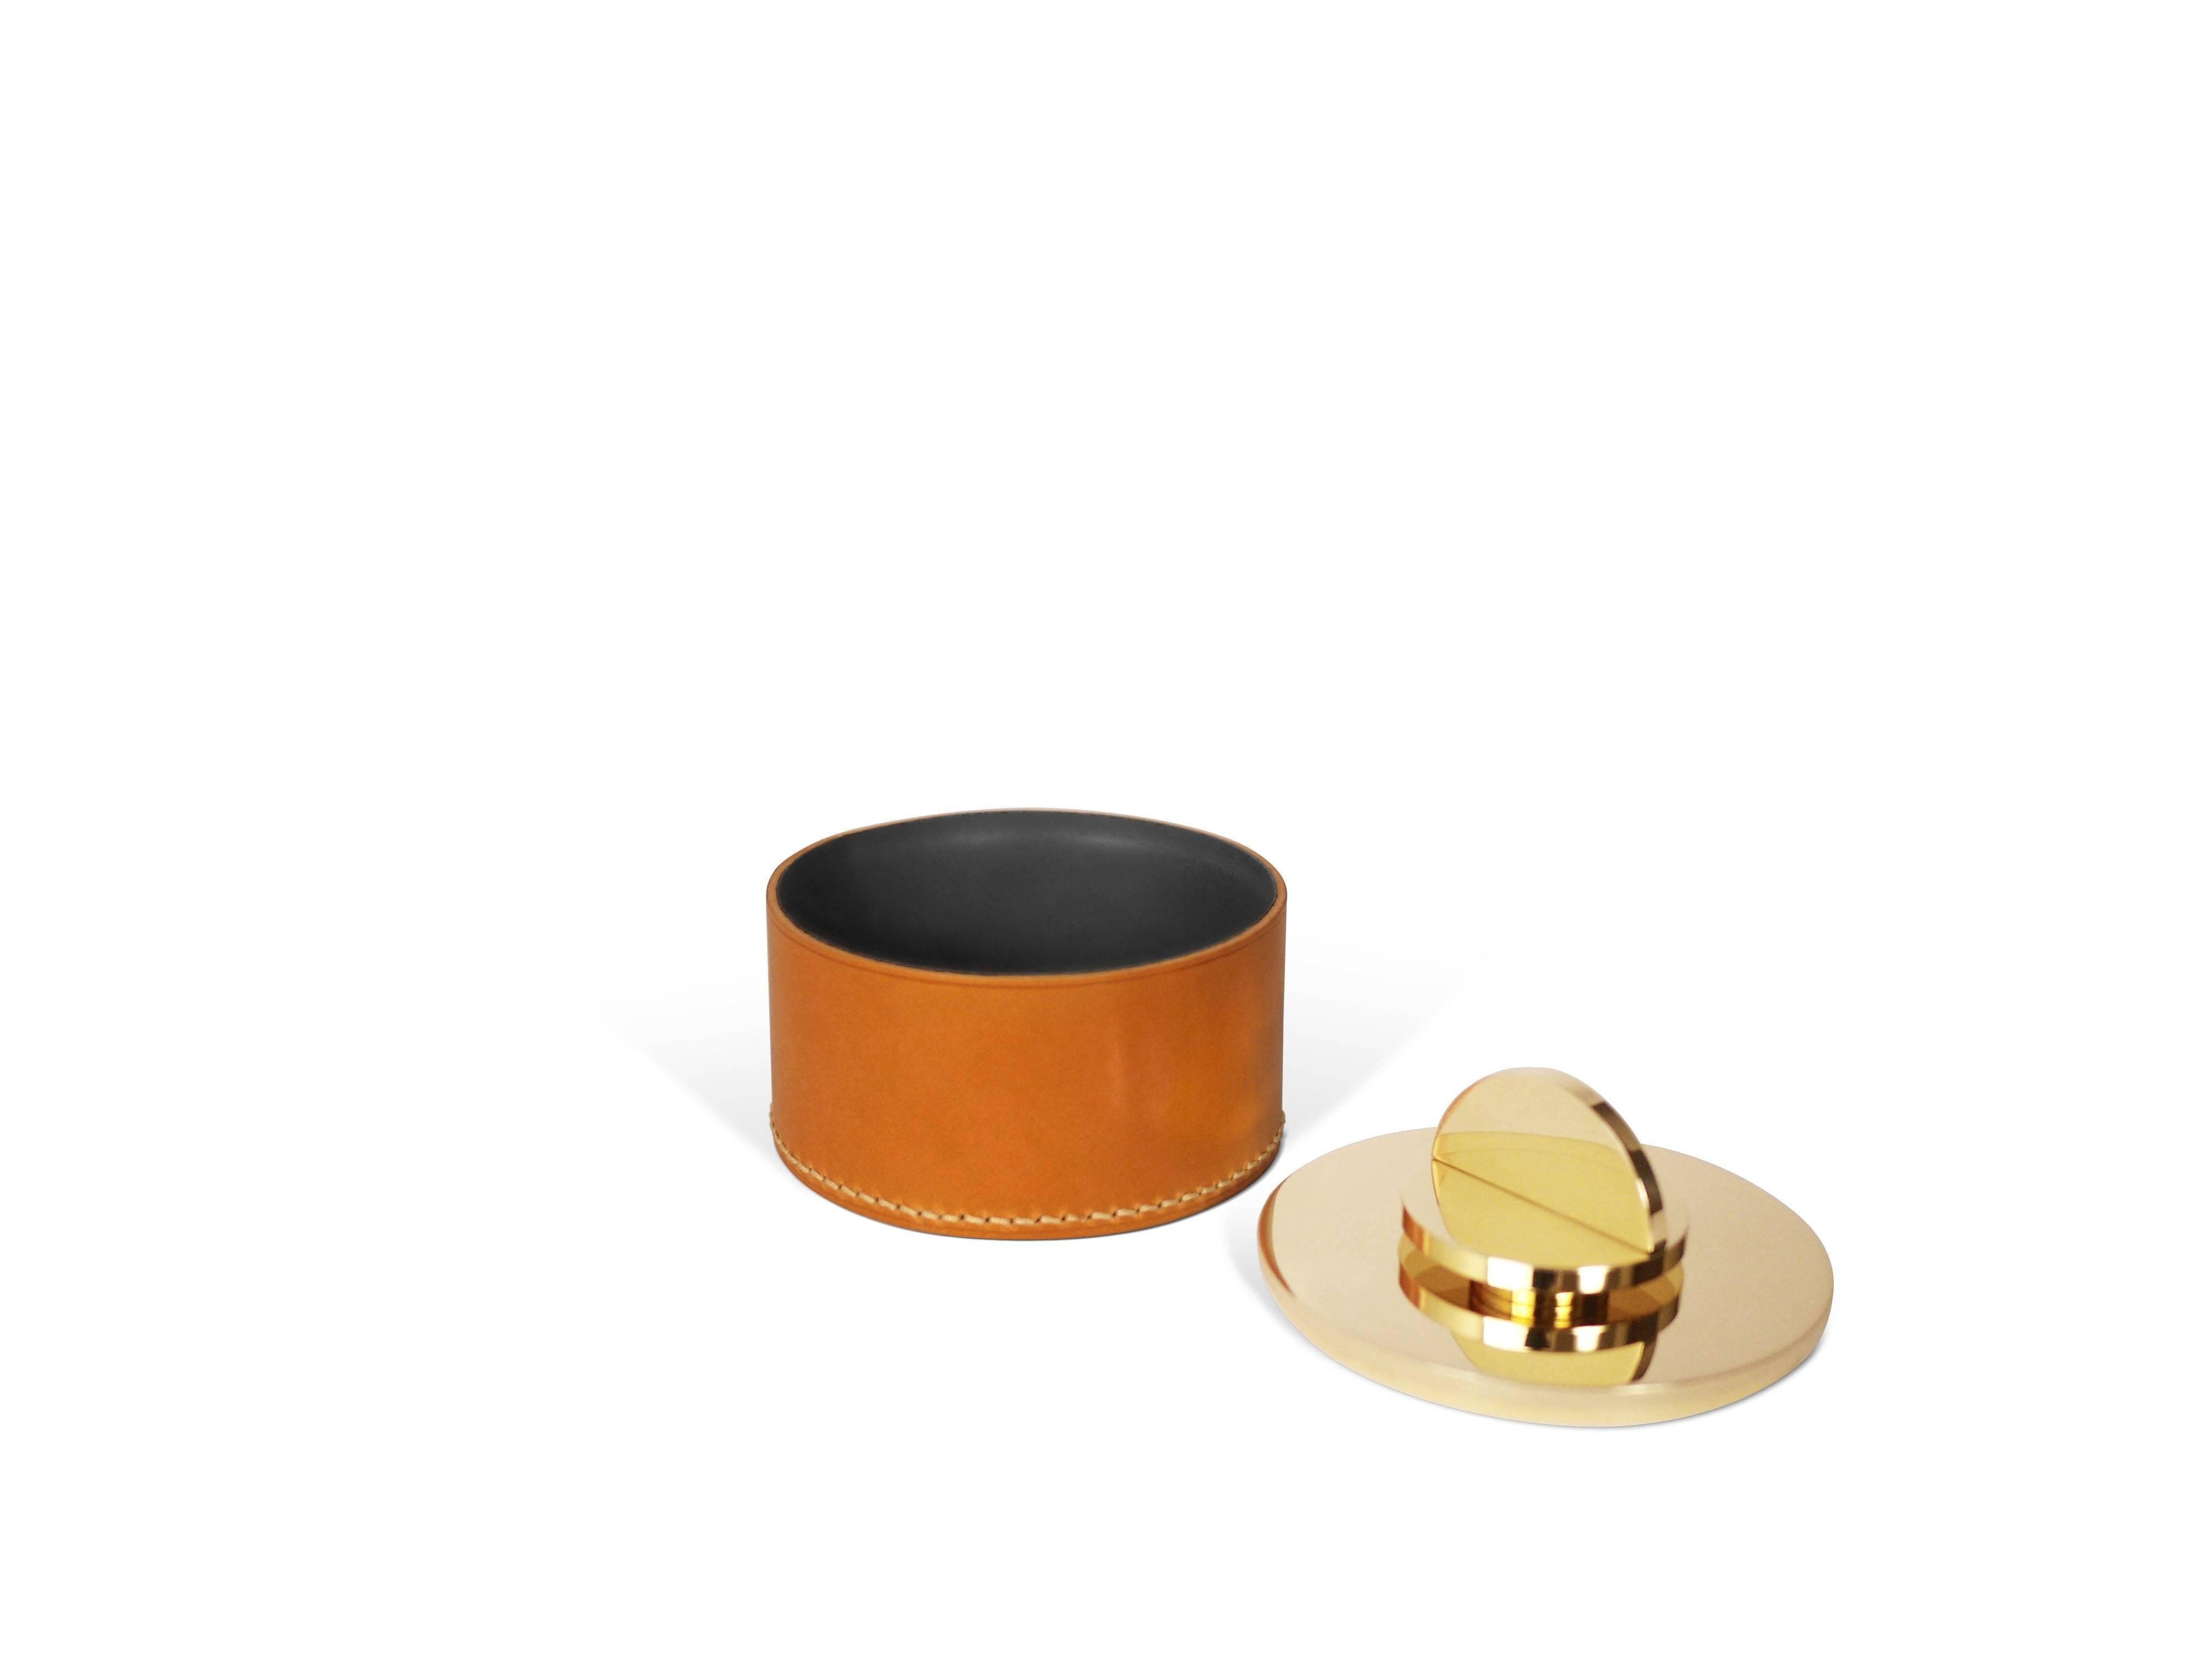 Part of Les Few's Armance collection, this contemporary, cognac colored, round, leather and brass, modern, Minimalist box is made by artisans in Sweden. The interior leather comes in either anthracite grey or navy. The brass is solid Swedish brass